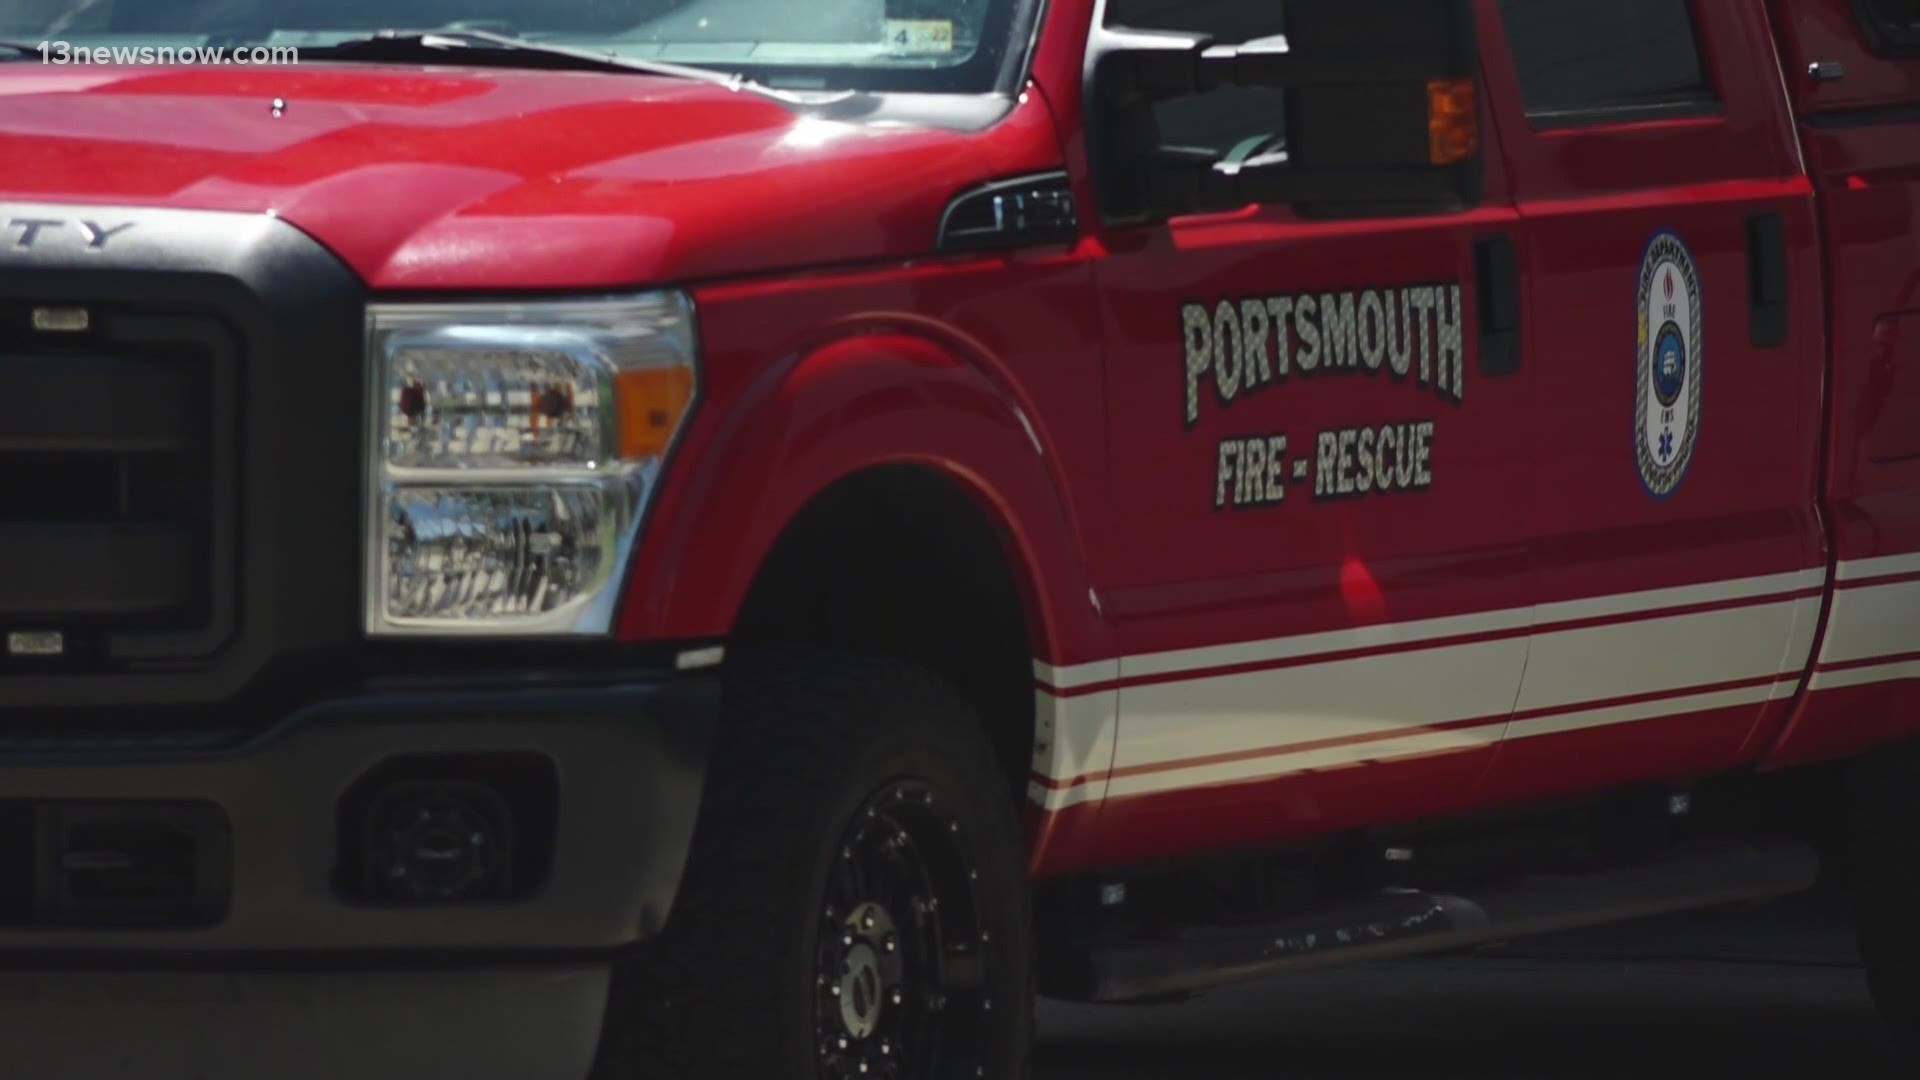 First responders in Portsmouth want better work conditions and now they have a chance to try and get it.